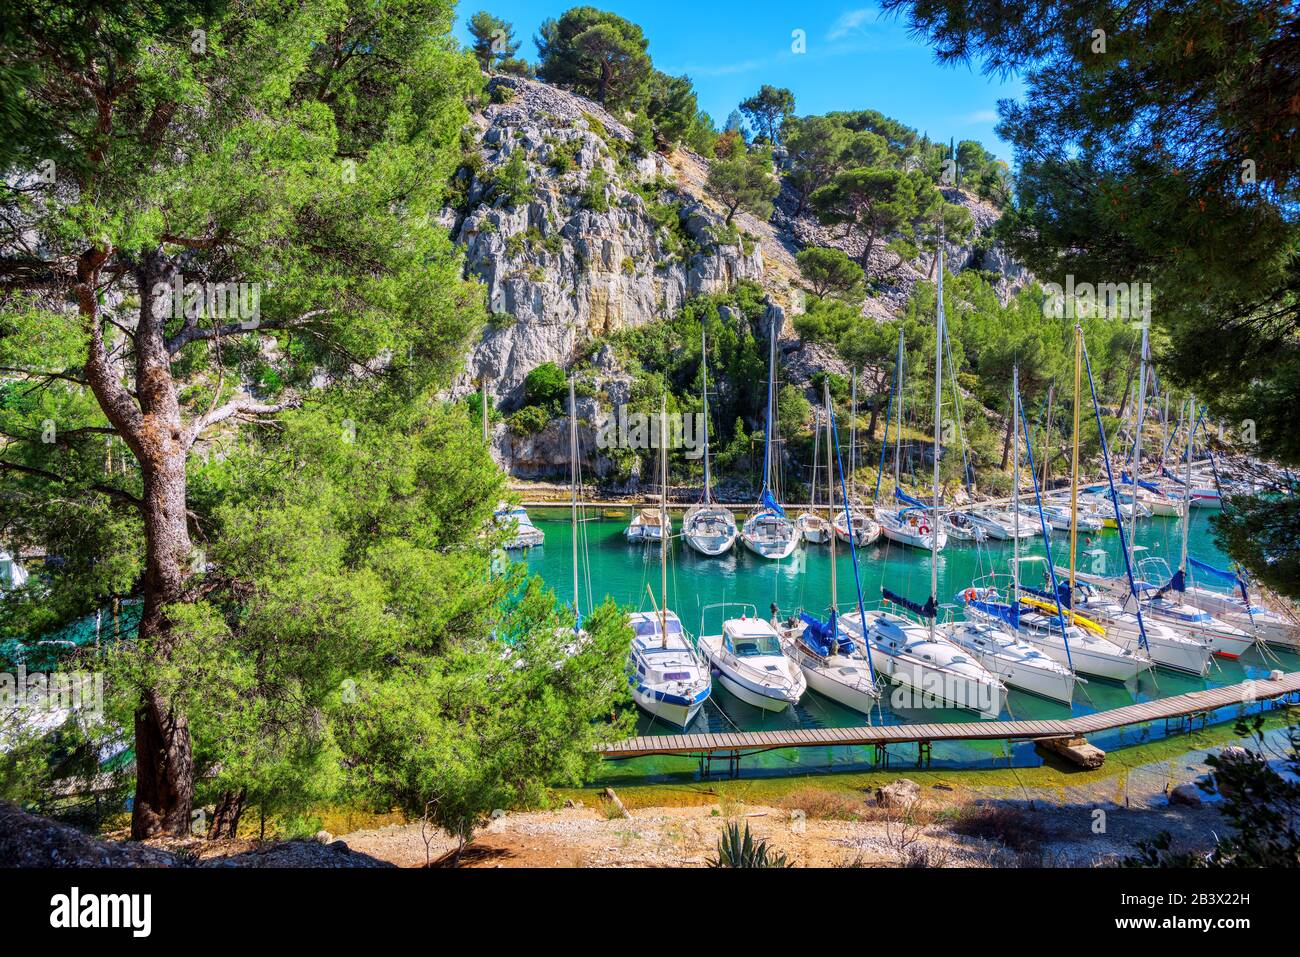 White boats in Calanque de Port Miou, one of the biggest fjords in Cassis, Provence, France Stock Photo